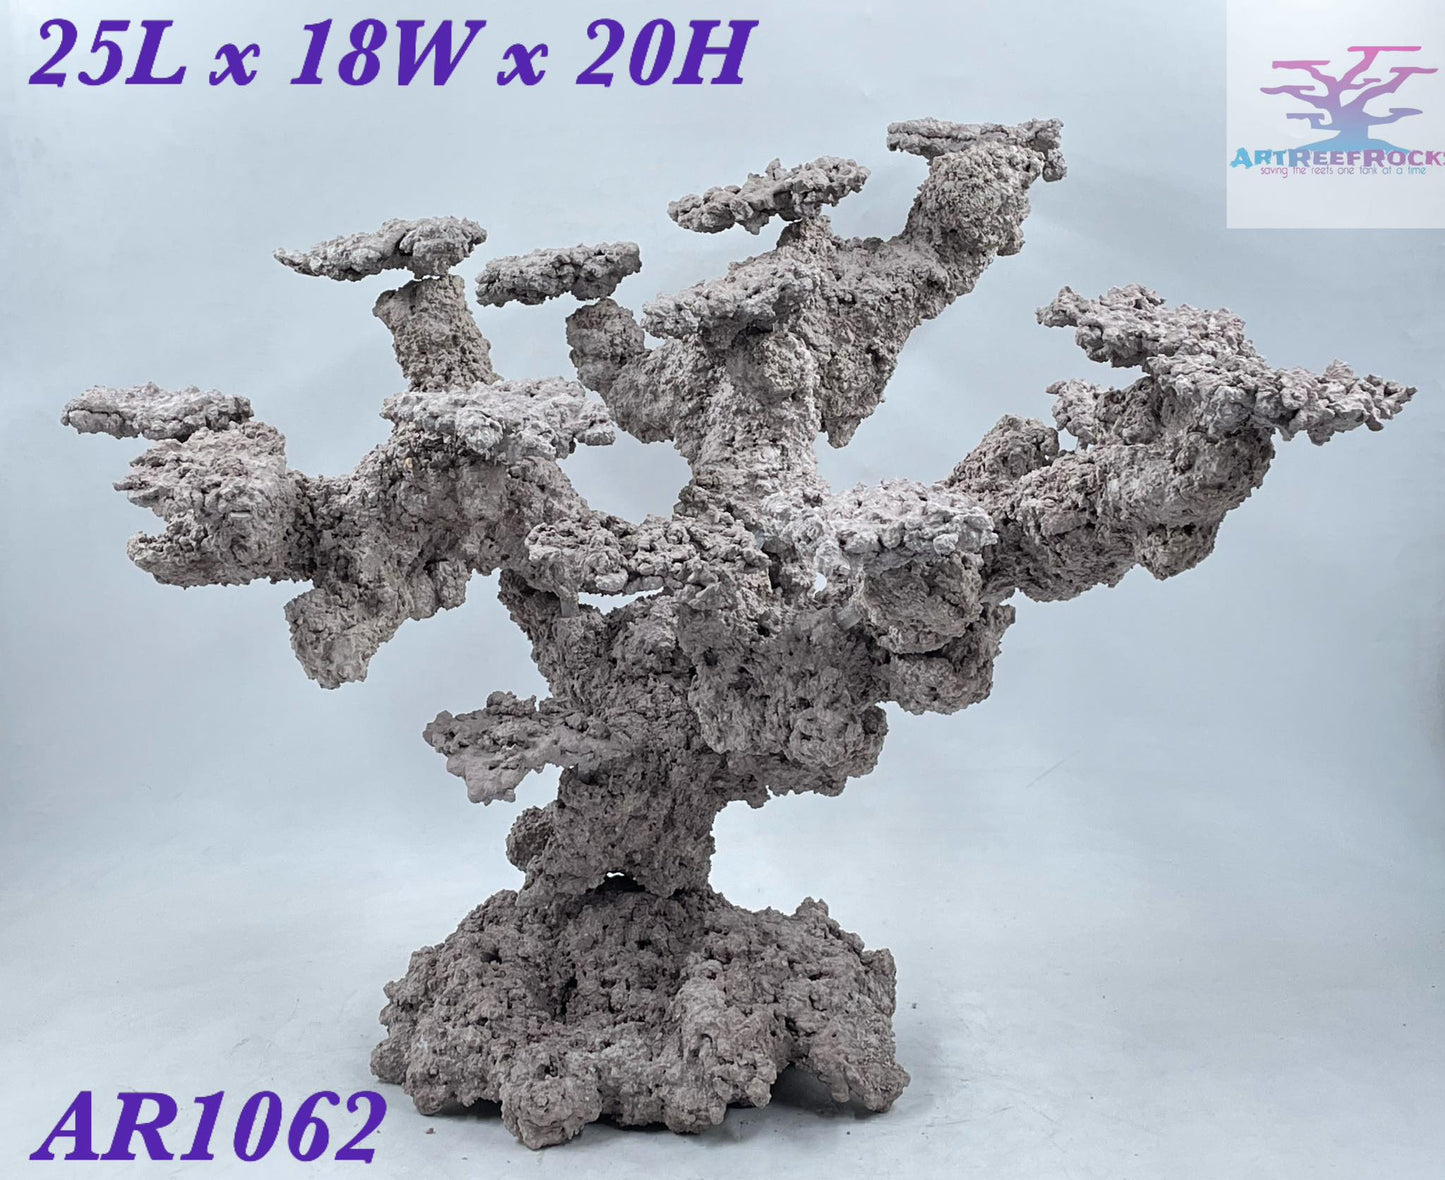 Sold Extra Large Art Reef Rock Structure WYSIWYG